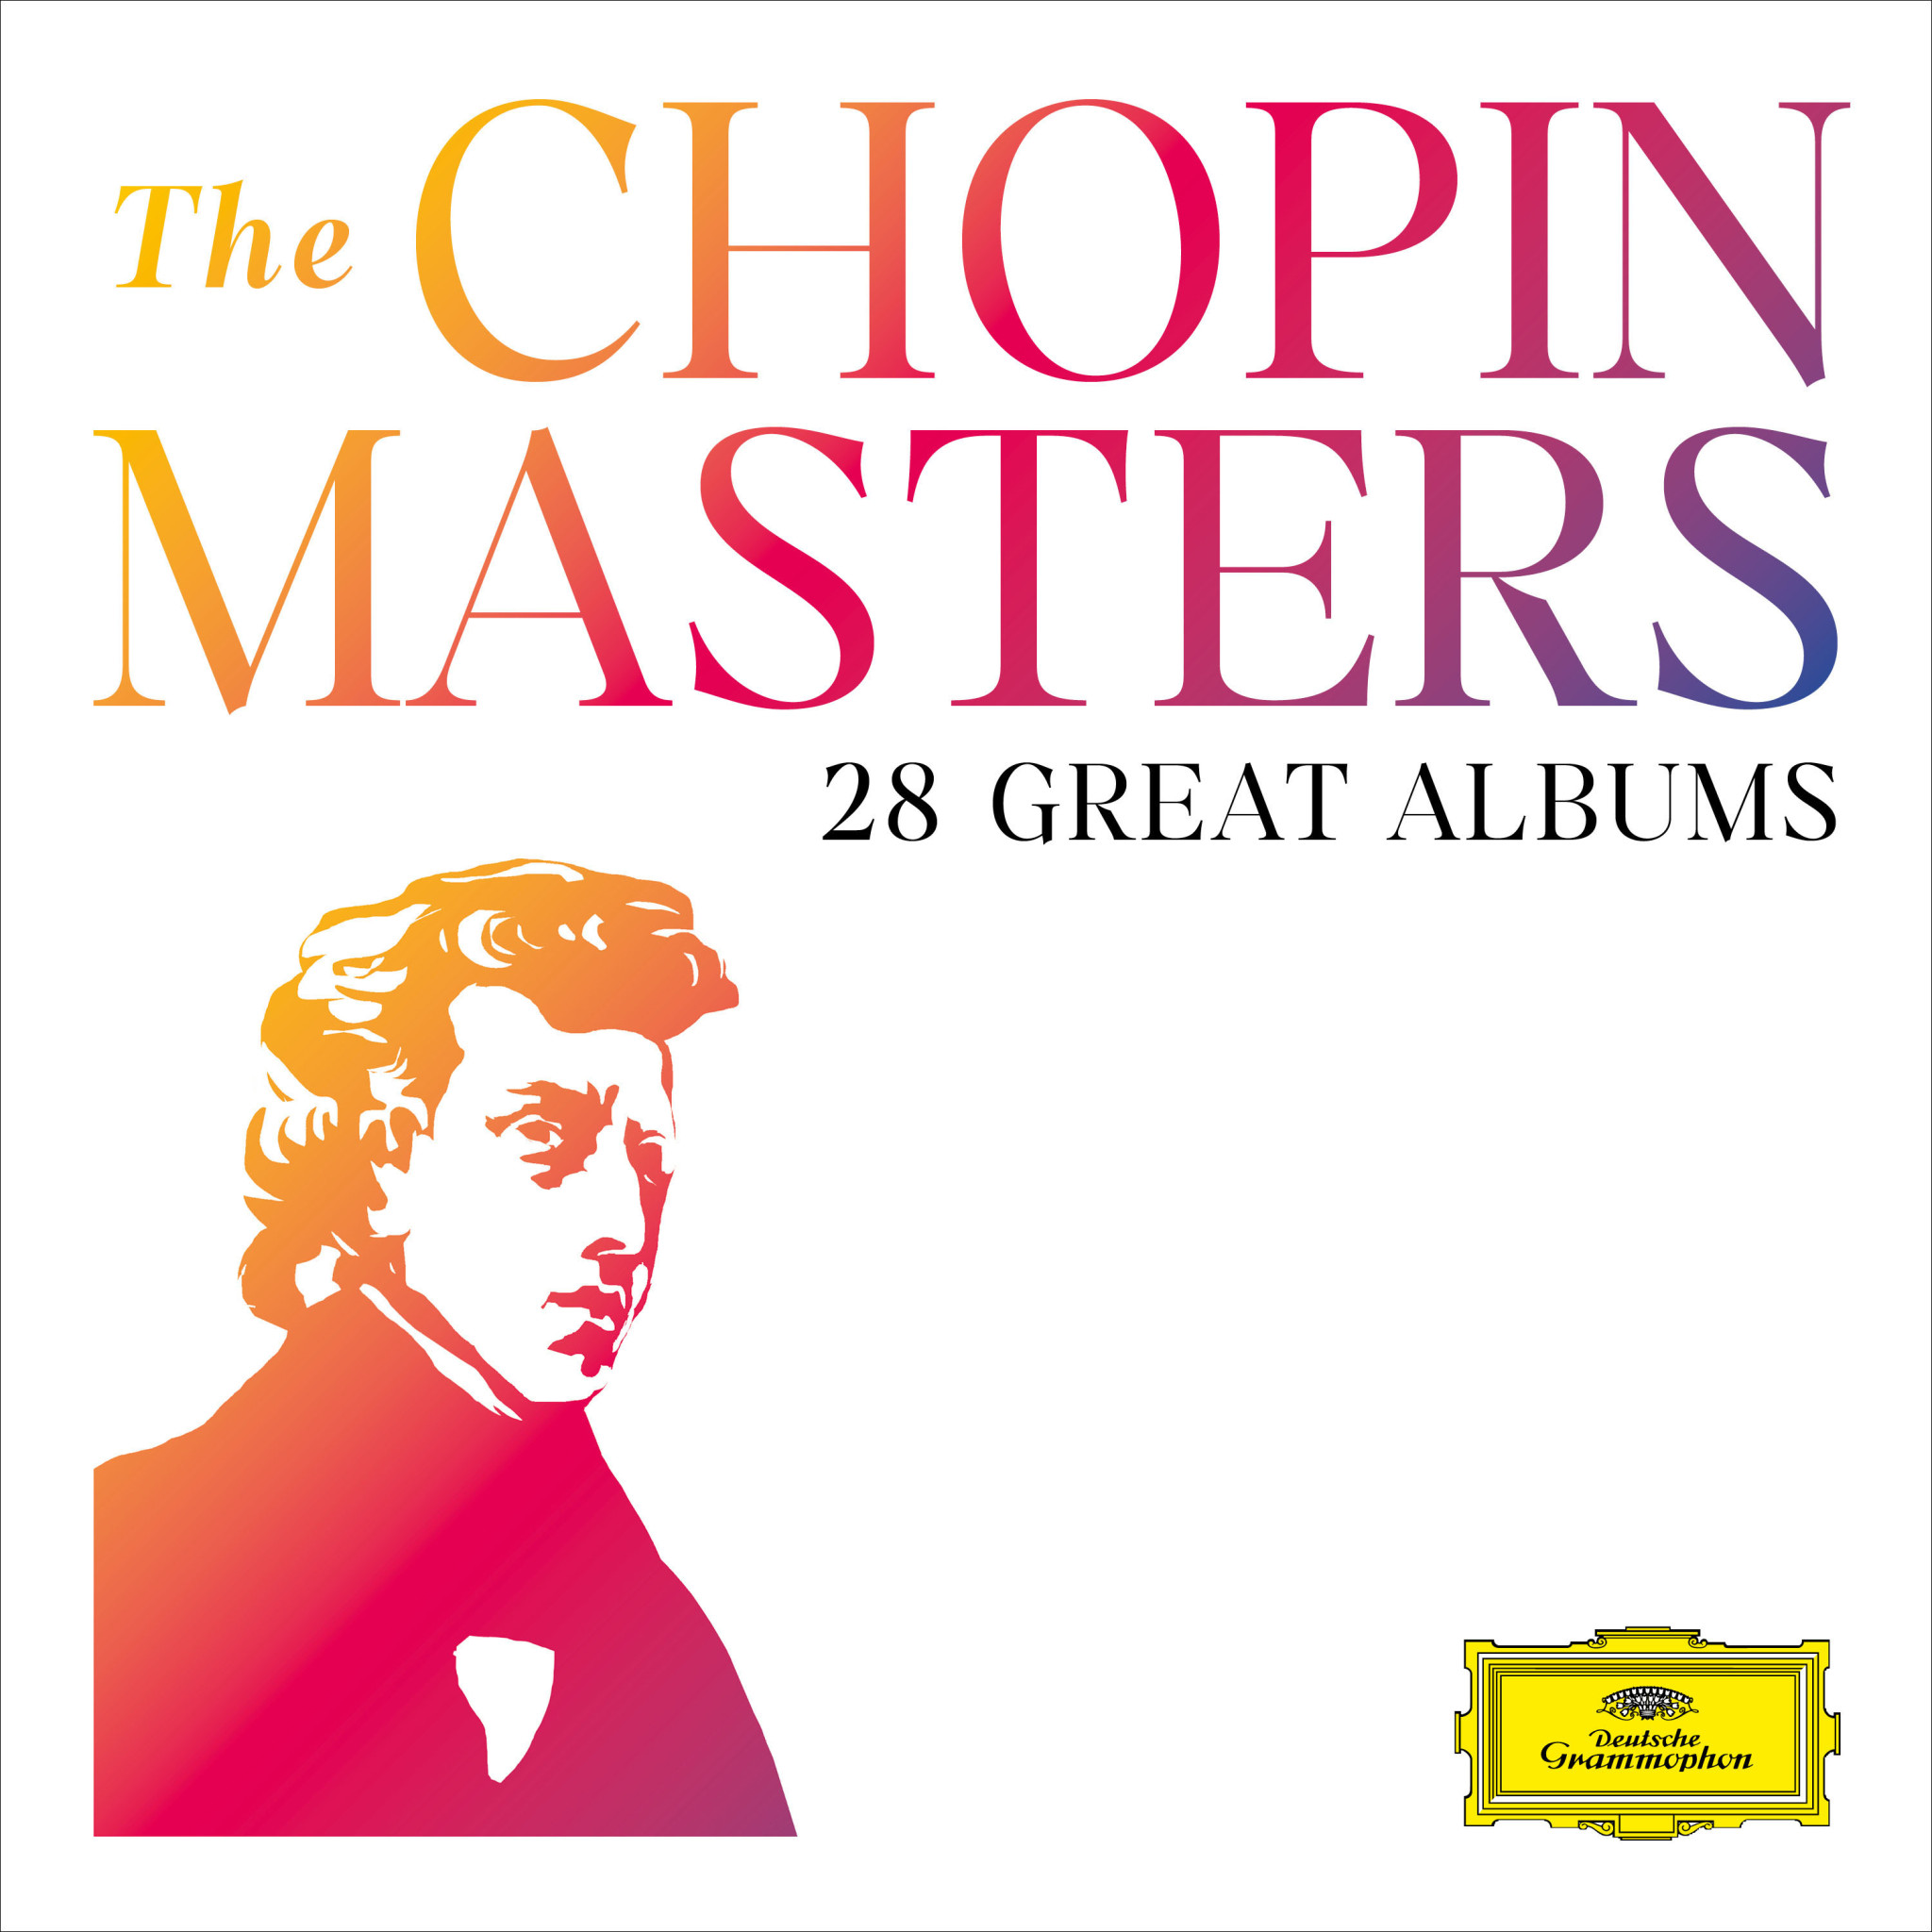 THE CHOPIN MASTERS